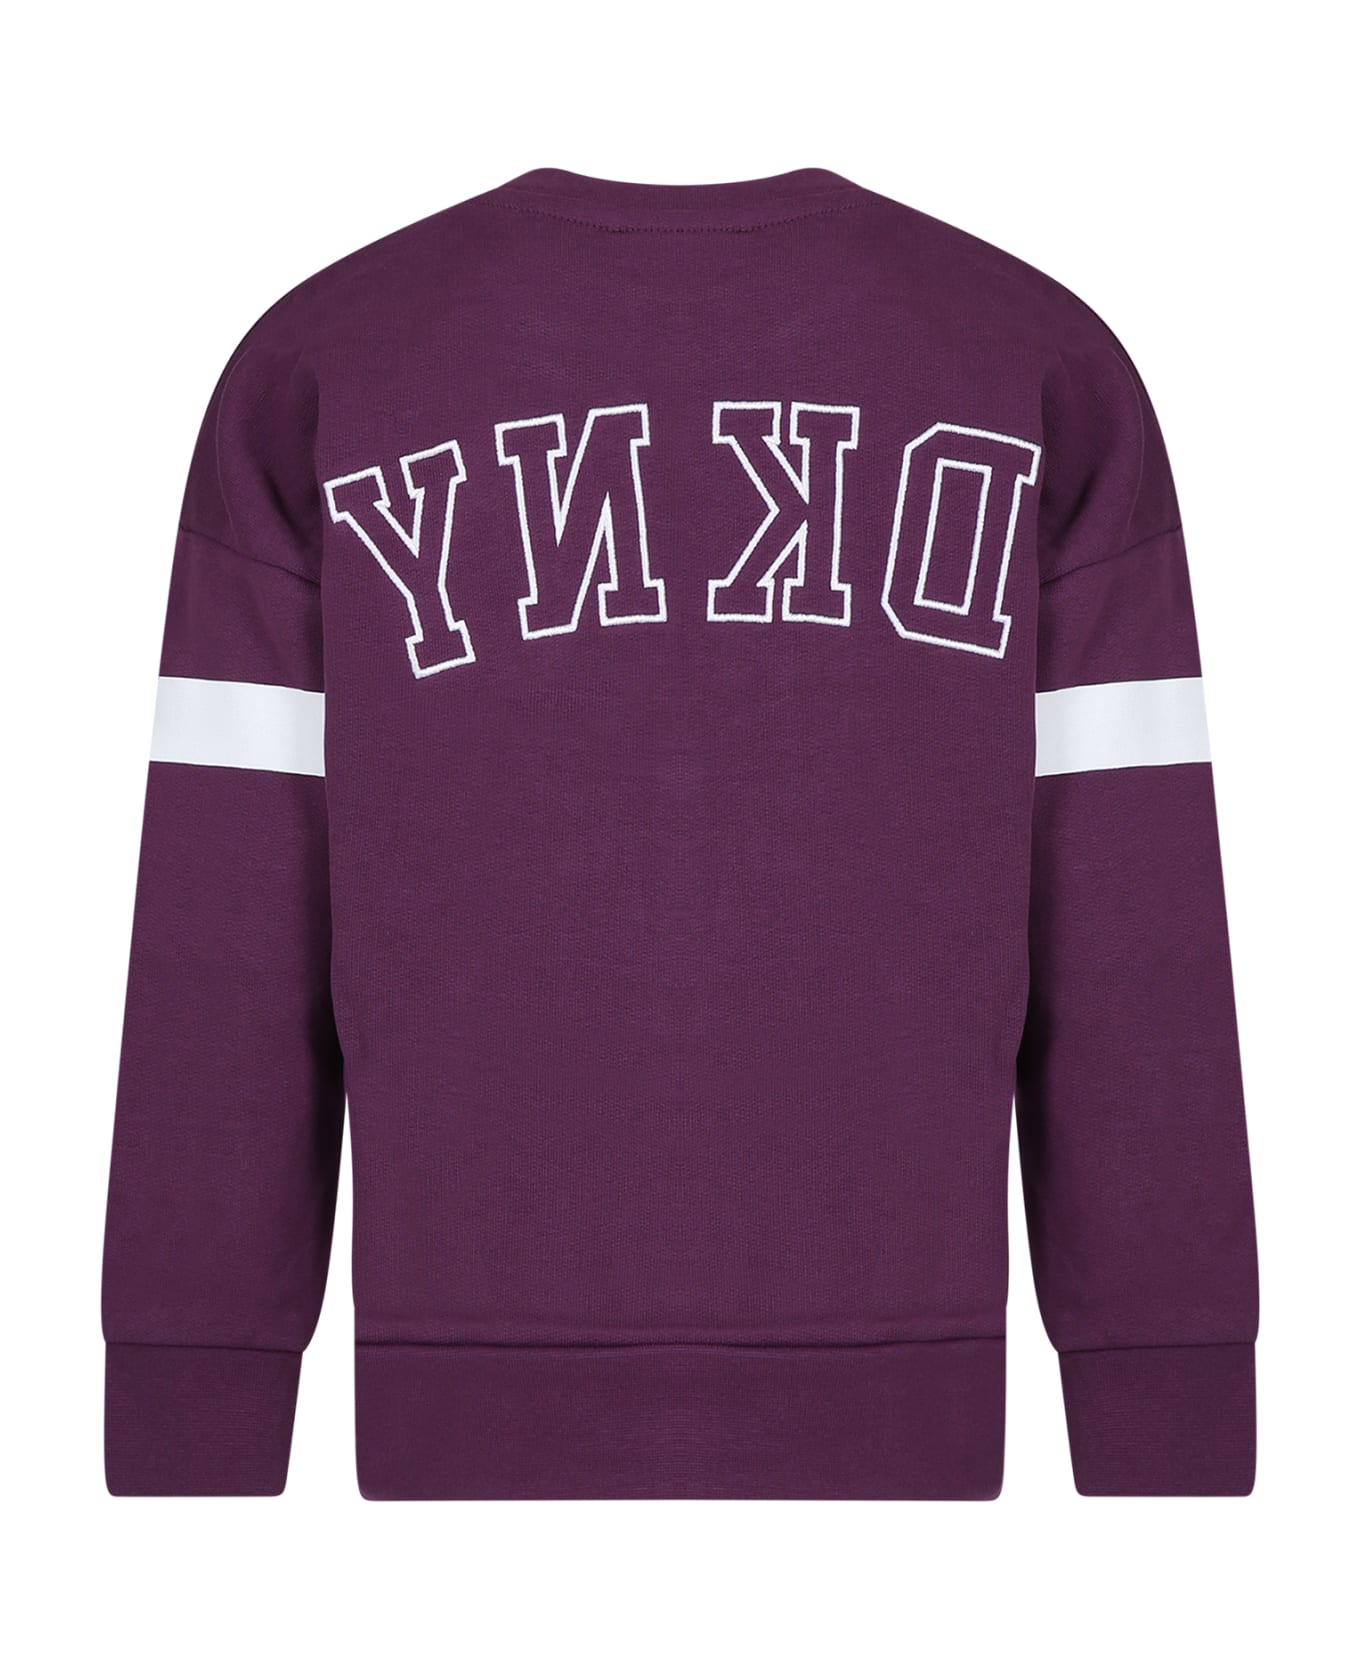 DKNY Purple Sweatshirt For Girl With Logo - Violet